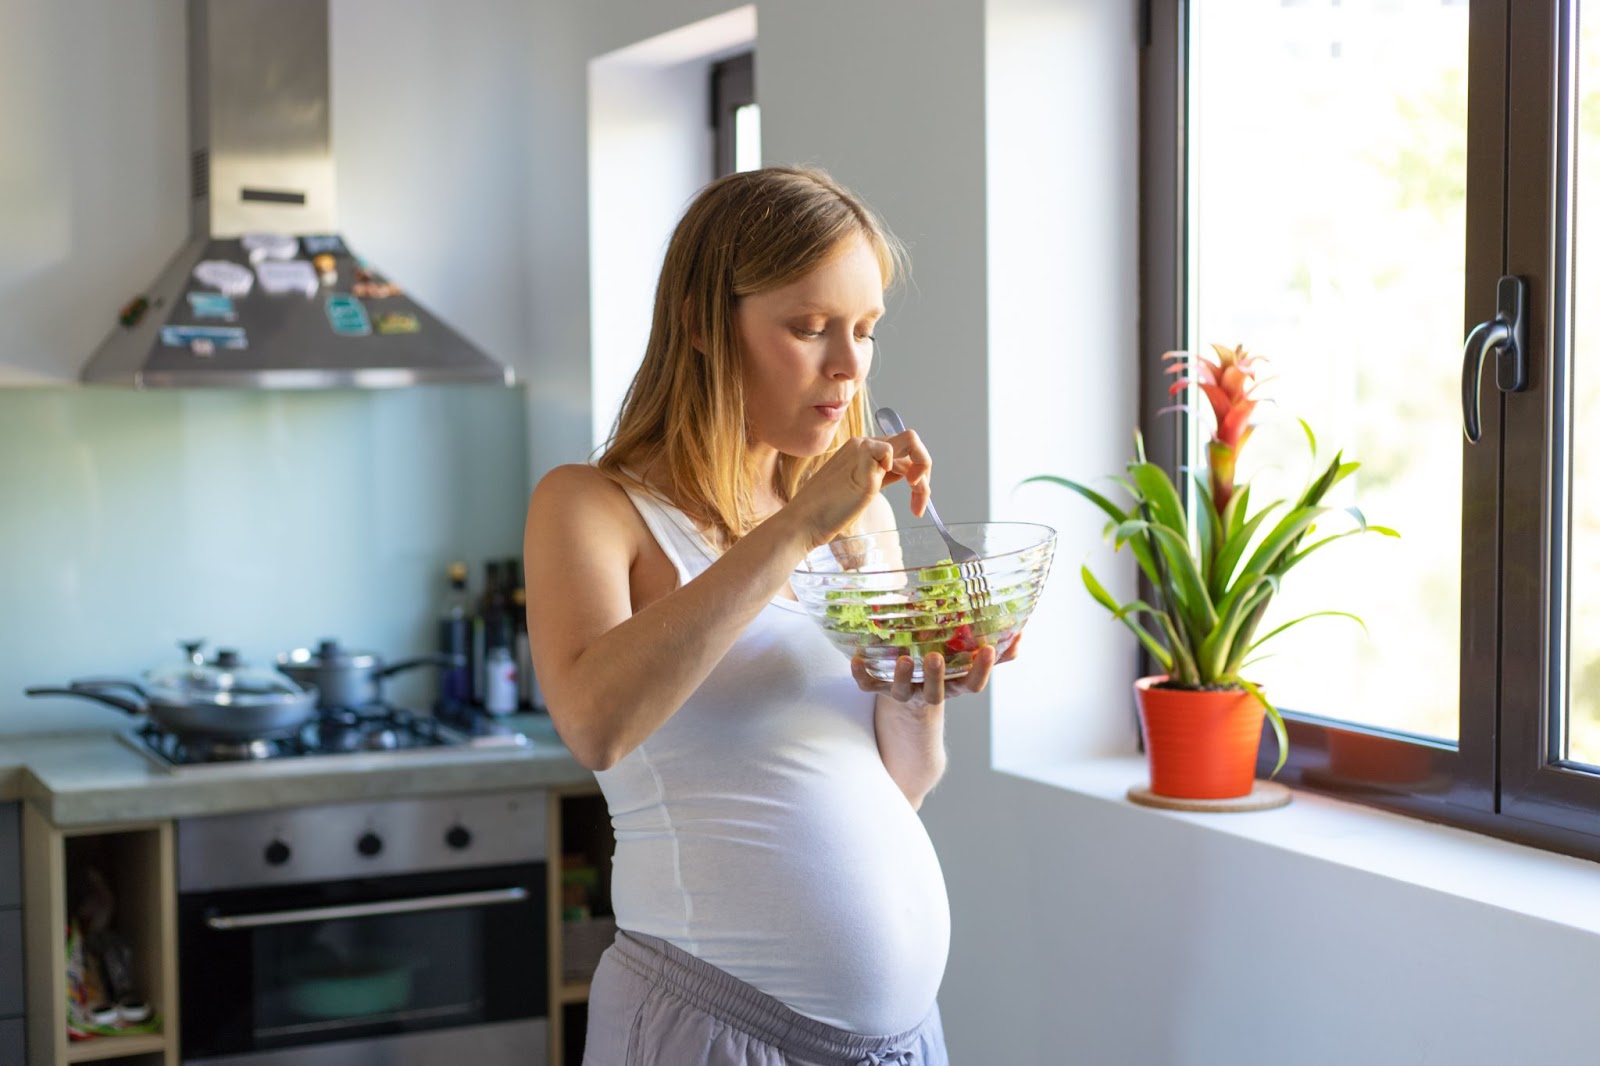 Indian Foods to Eat during Pregnancy